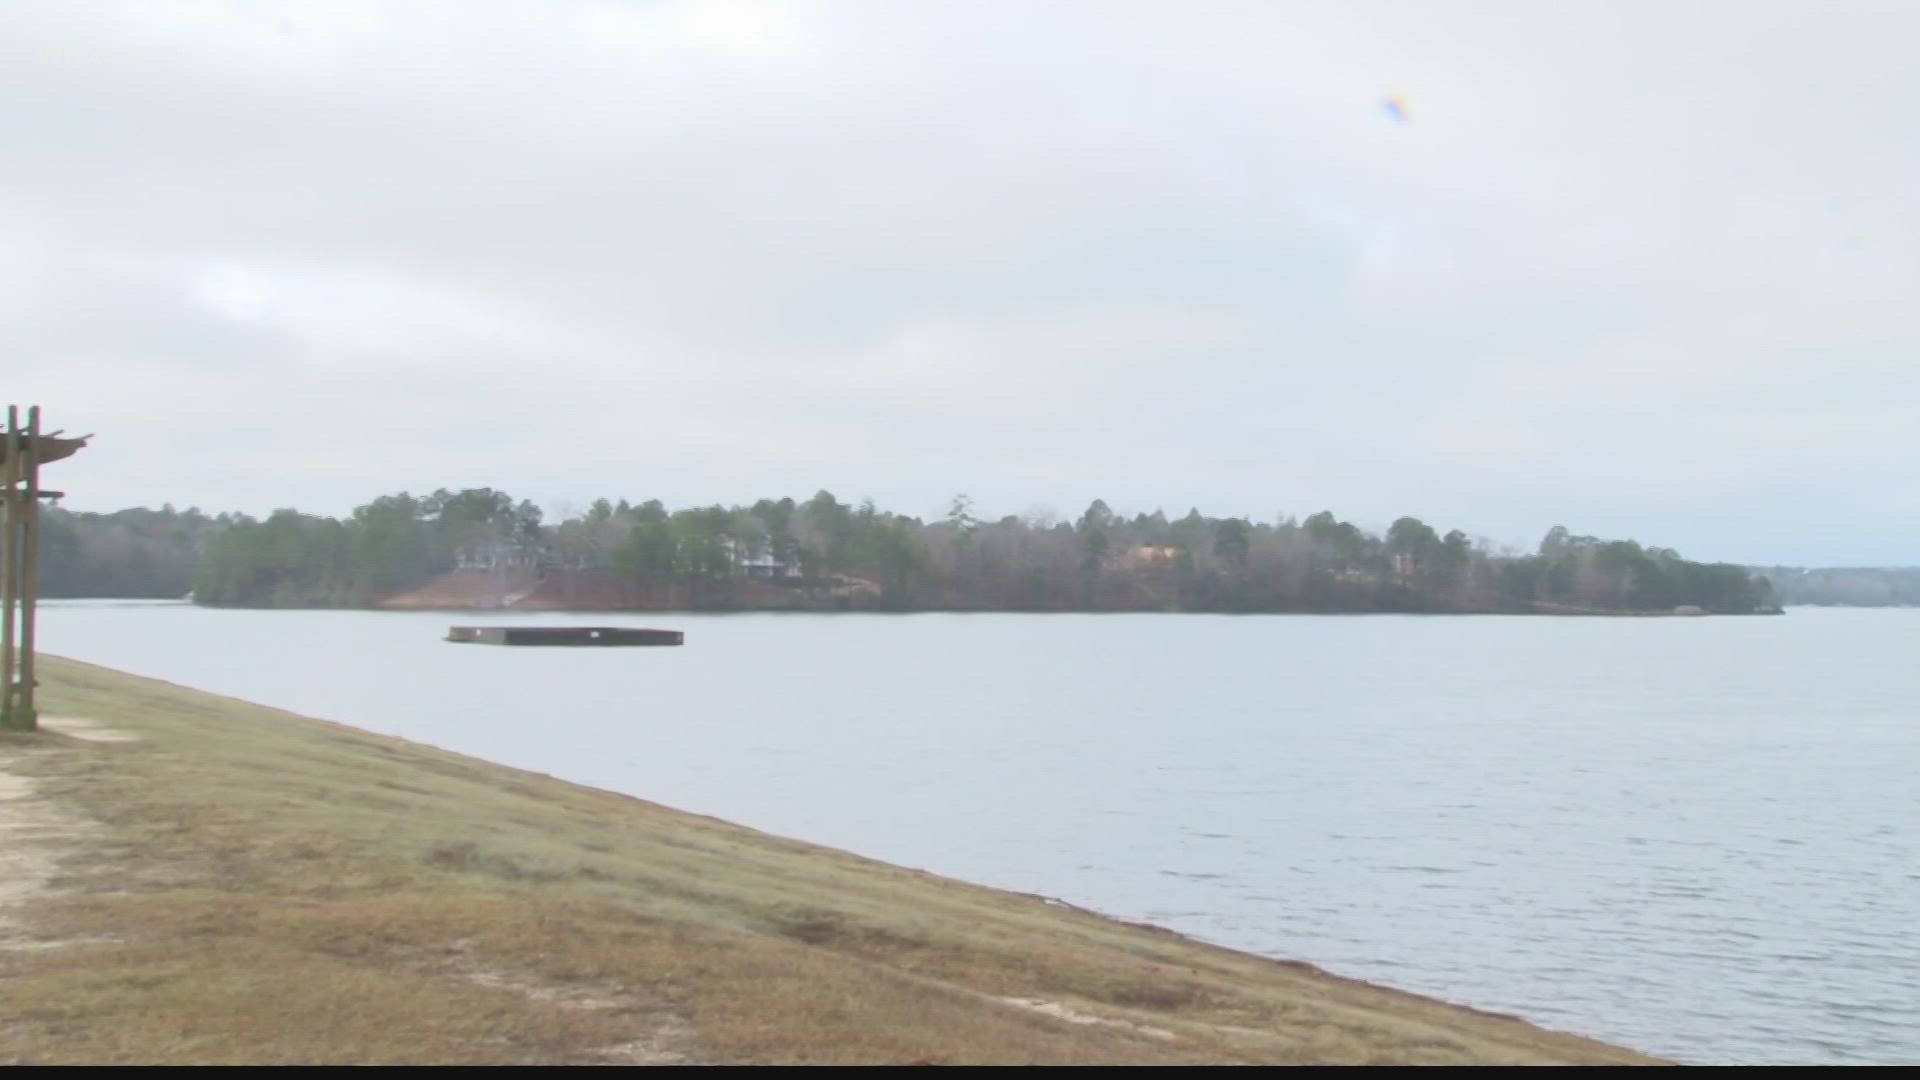 A body has been recovered at Lake Carolina in northeast Richland County in an area where a man had earlier been reported missing.